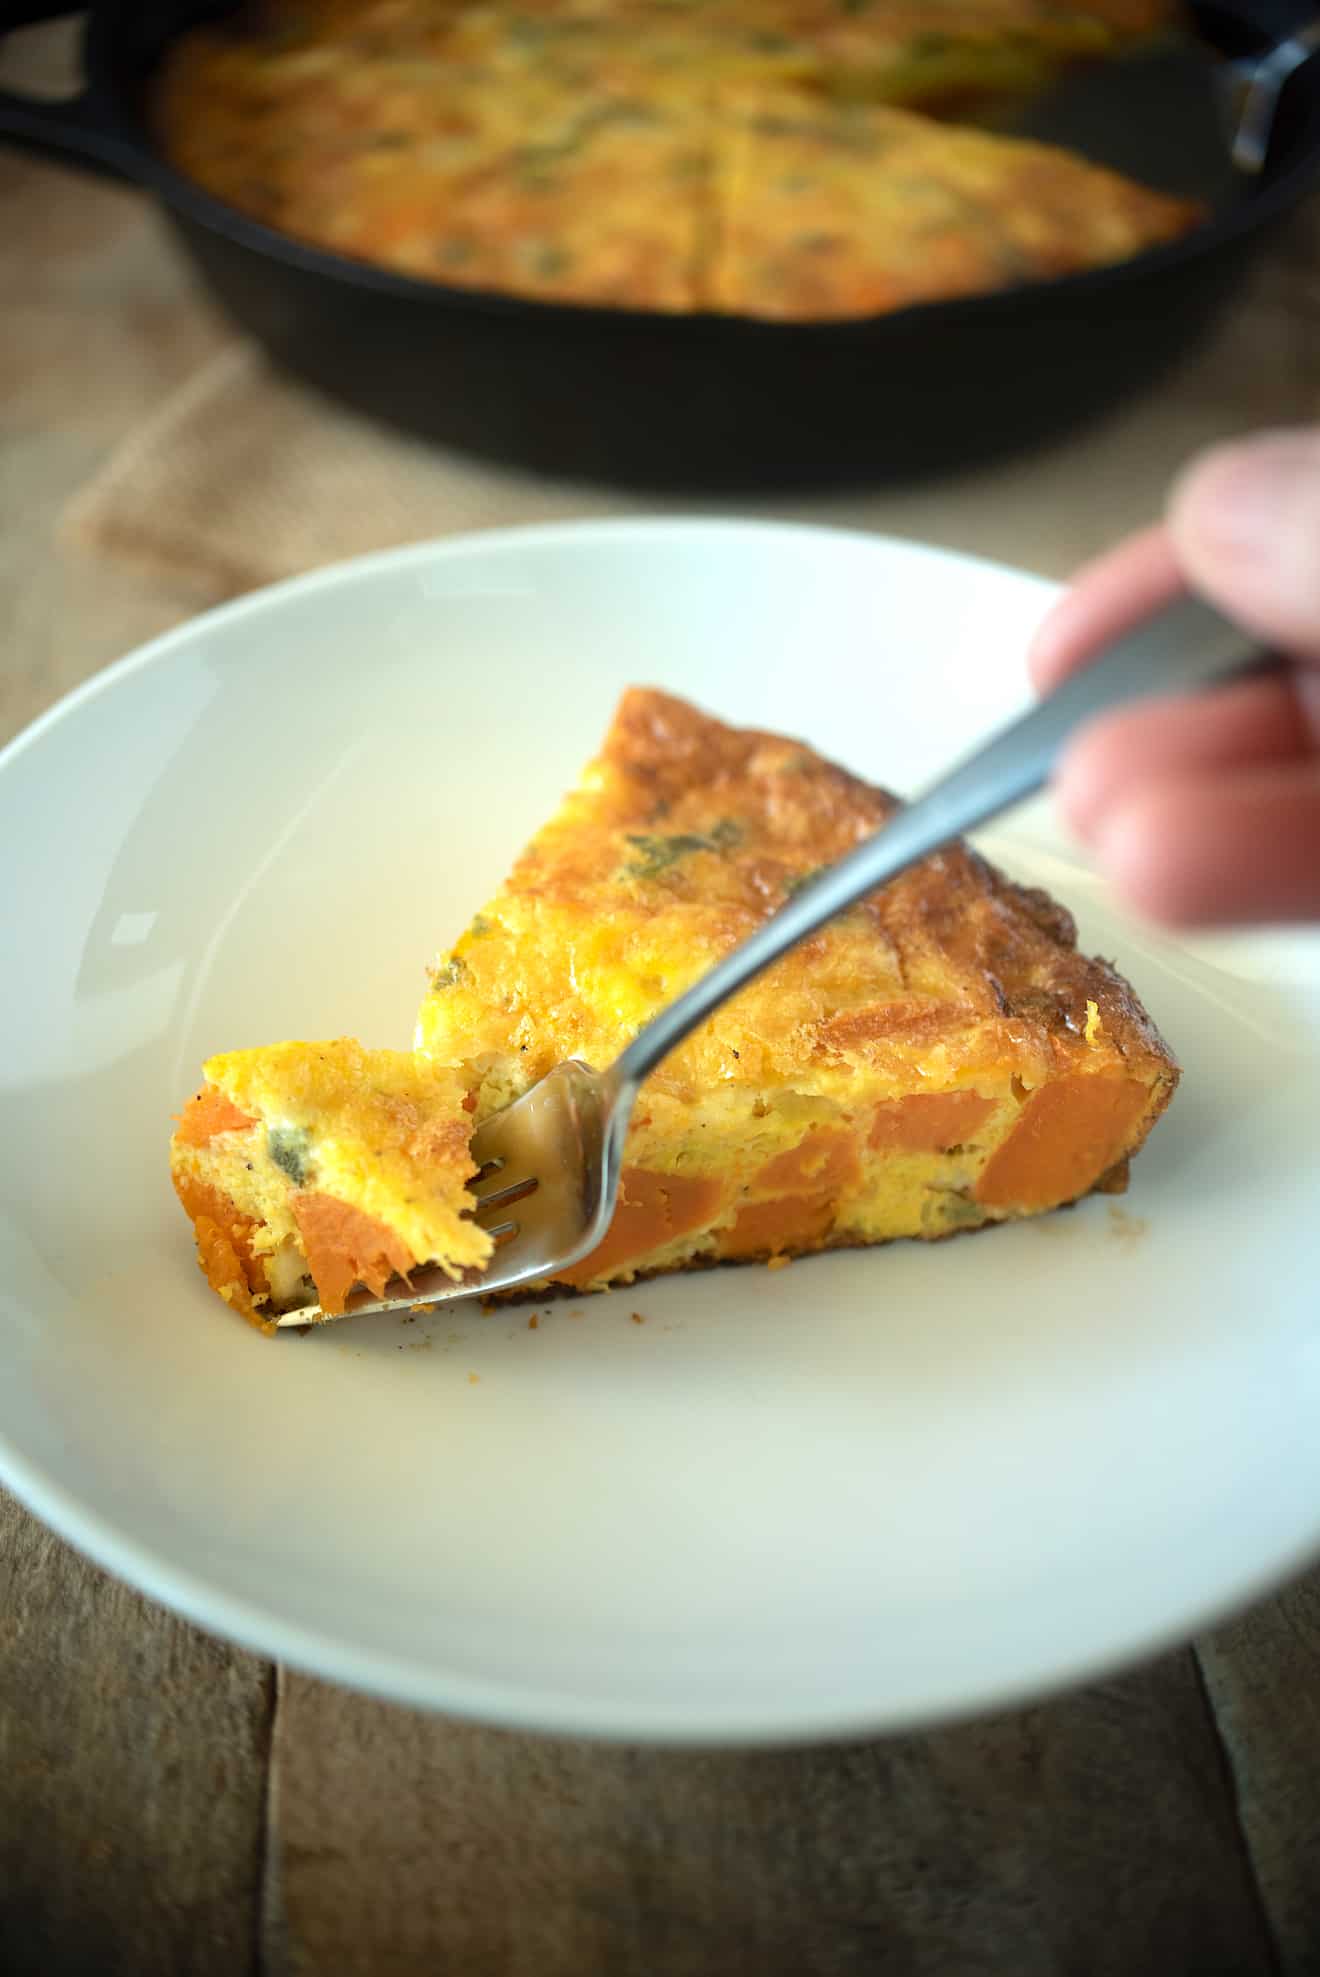 Using a fork to get a bite of sweet potato and sage frittata